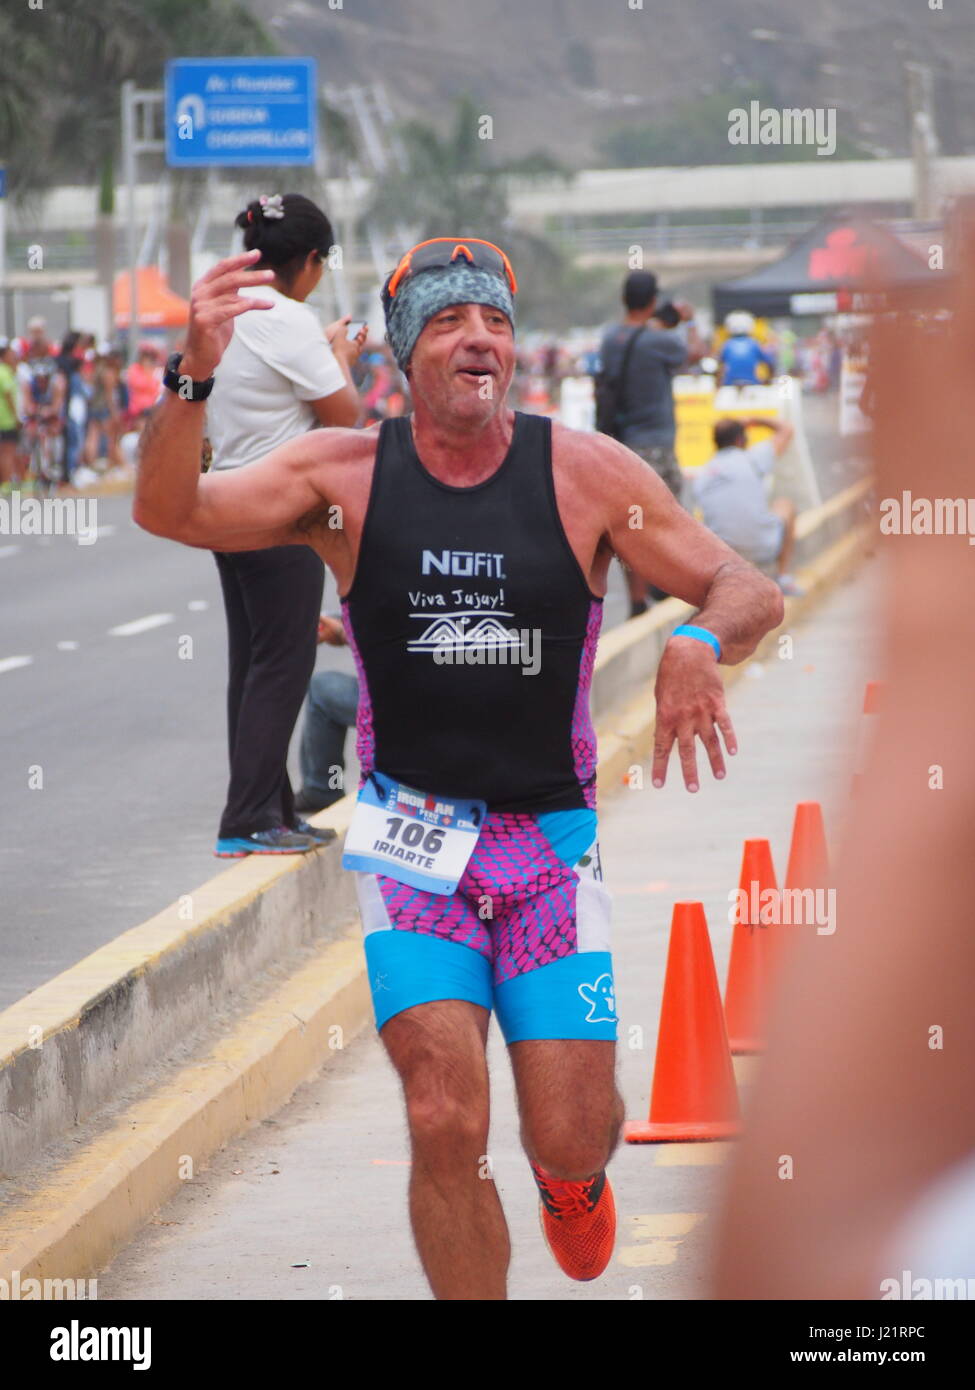 Gustavo Iriarte (Argentina) running. Over 1653 athletes ran in the IRONMAN 70.3 Peru race at Agua Dulce beach in Chorrillos town, Lima. Stock Photo